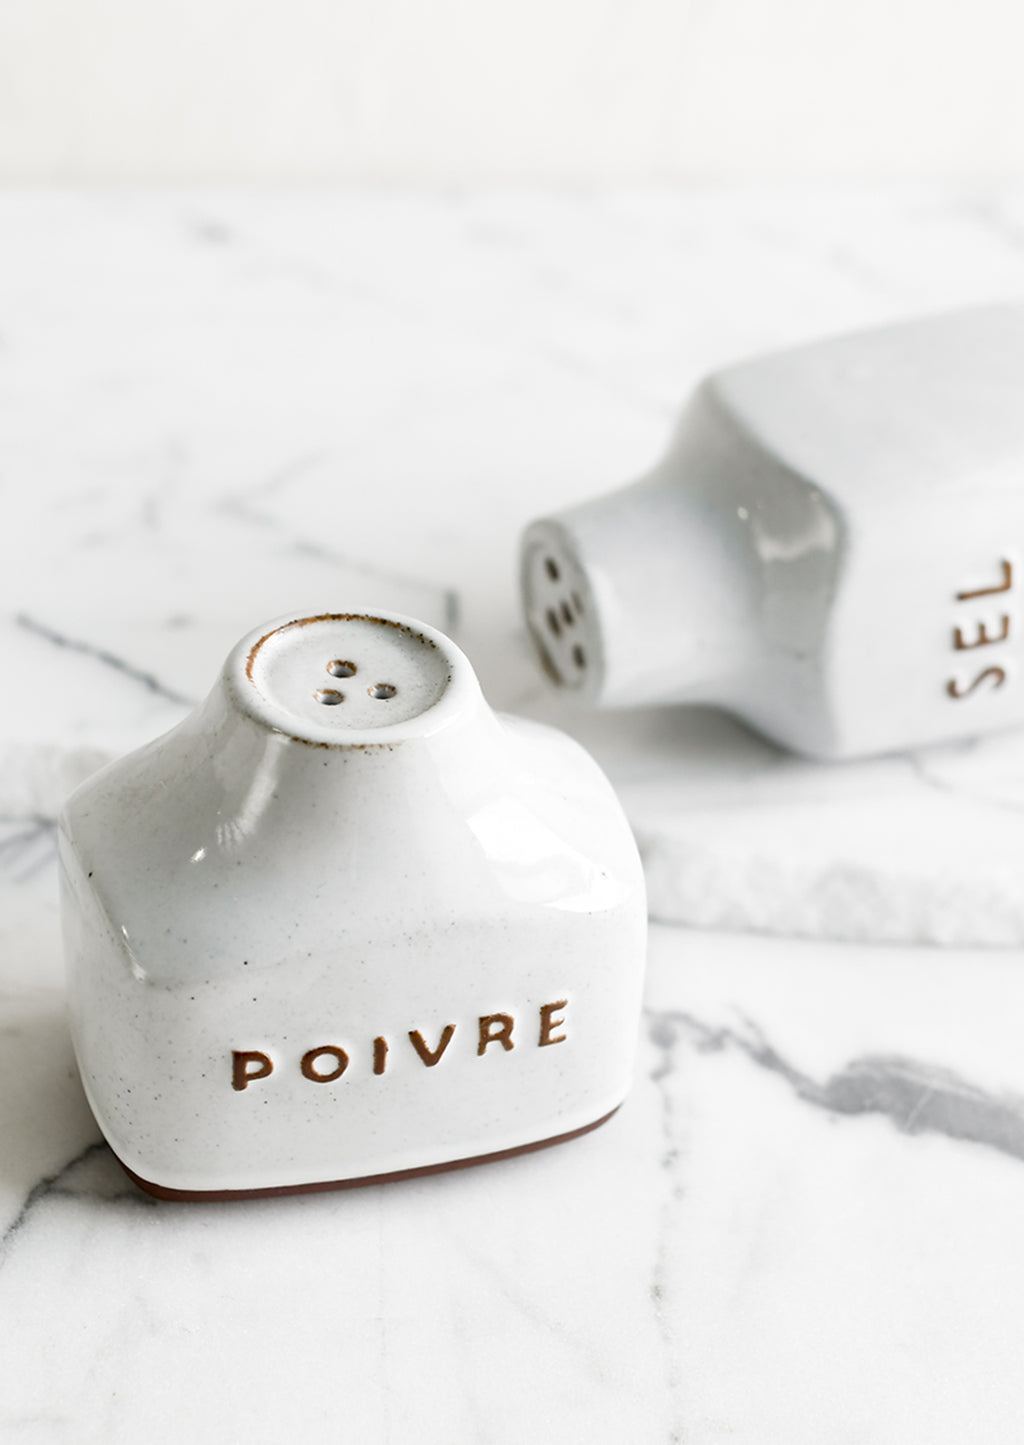 1: Ceramic salt and pepper shakers with text detail in French.